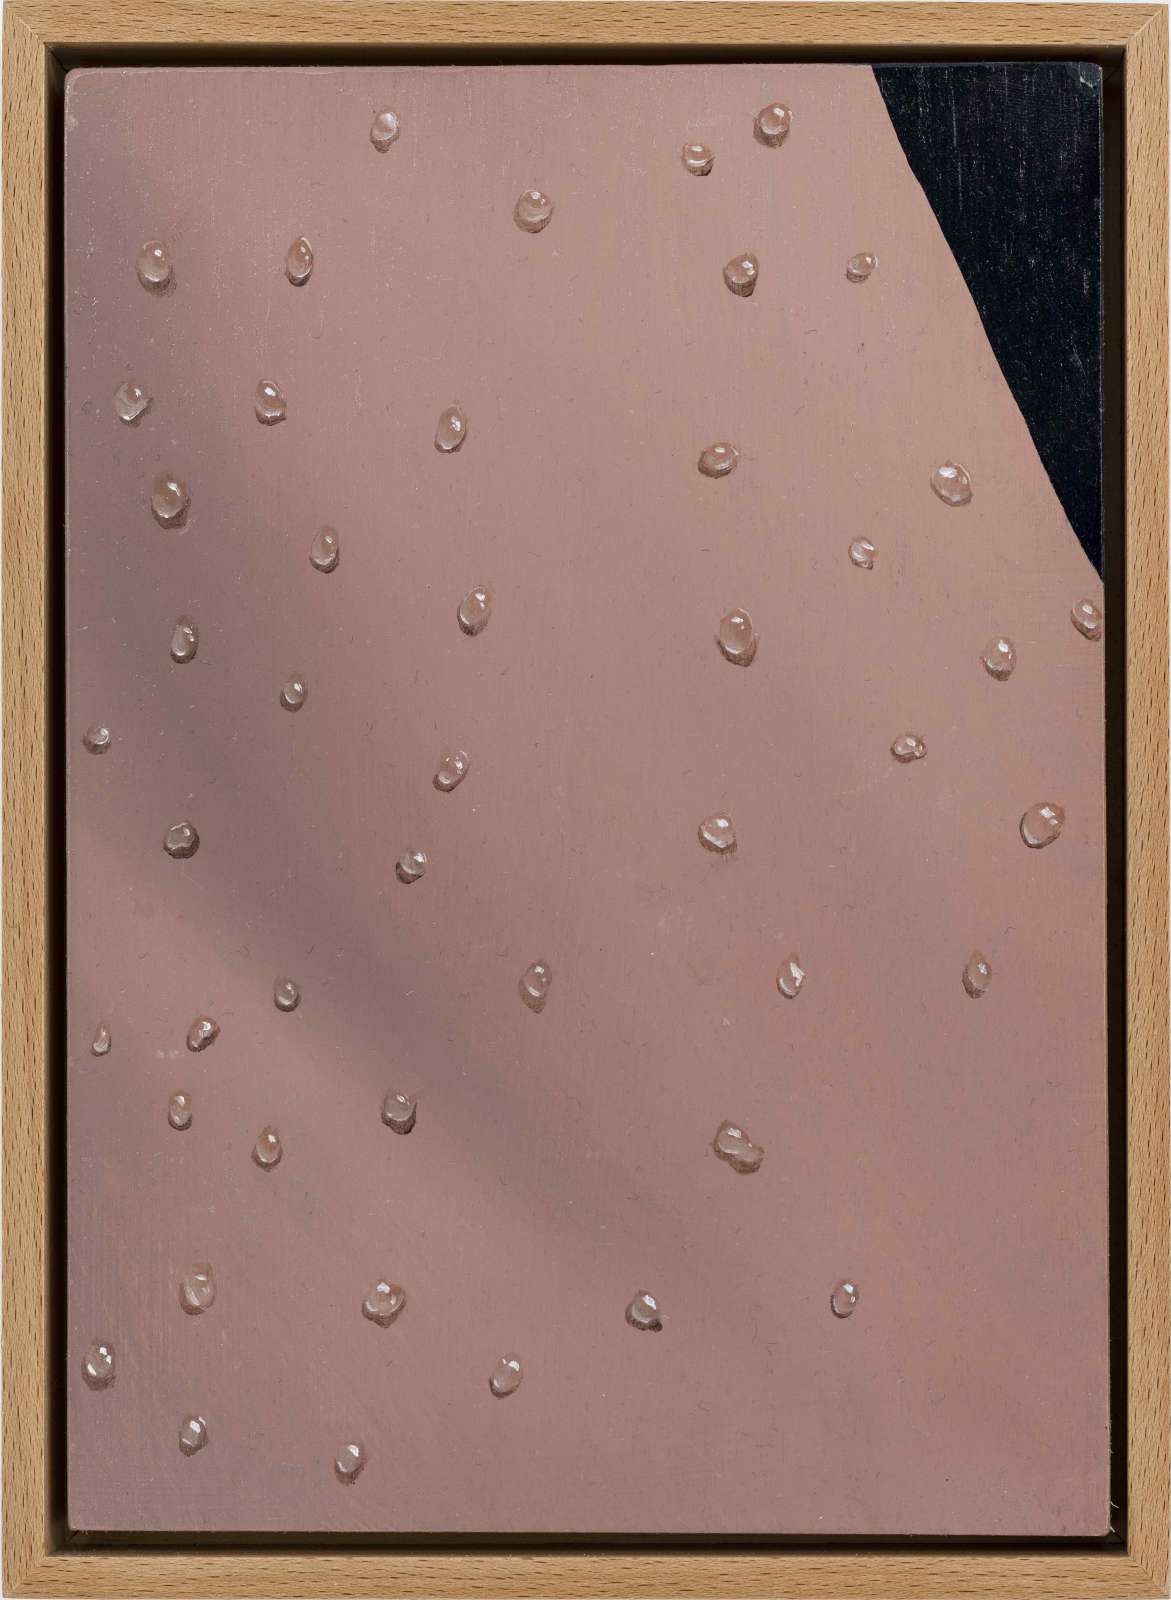 Natalia Gonzalez Martin, Four states of matter: Drowned, 2021, Oil on wood, 21 x 14 cm